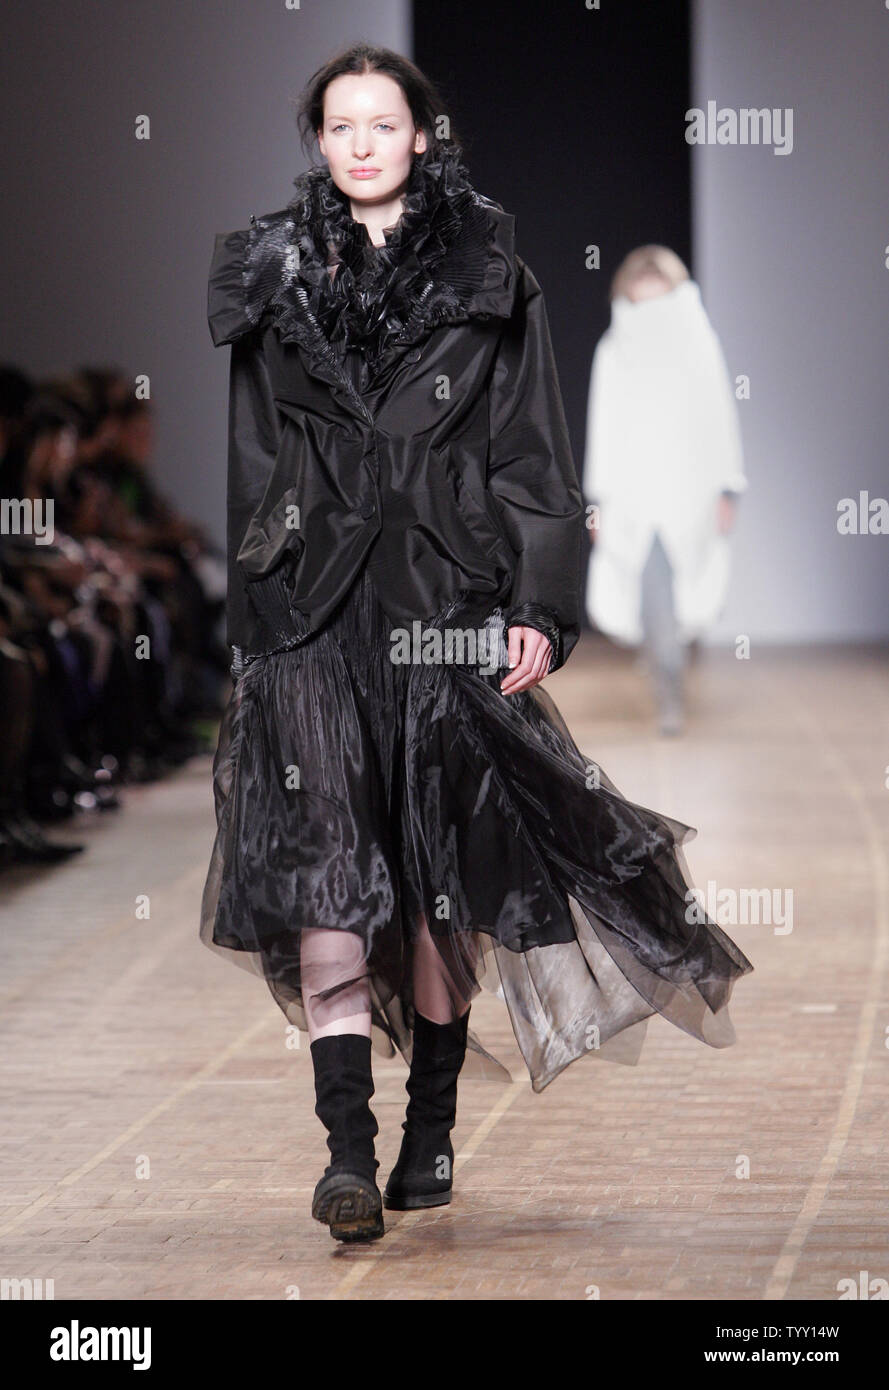 A model wears an outfit by Japanese fashion designer Dai Fujiwara for Issey Miyake at the Fall-Winter 2008/2009 ready-to-wear Paris Fashion Week, February 26, 2008. (UPI Photo) Stock Photo